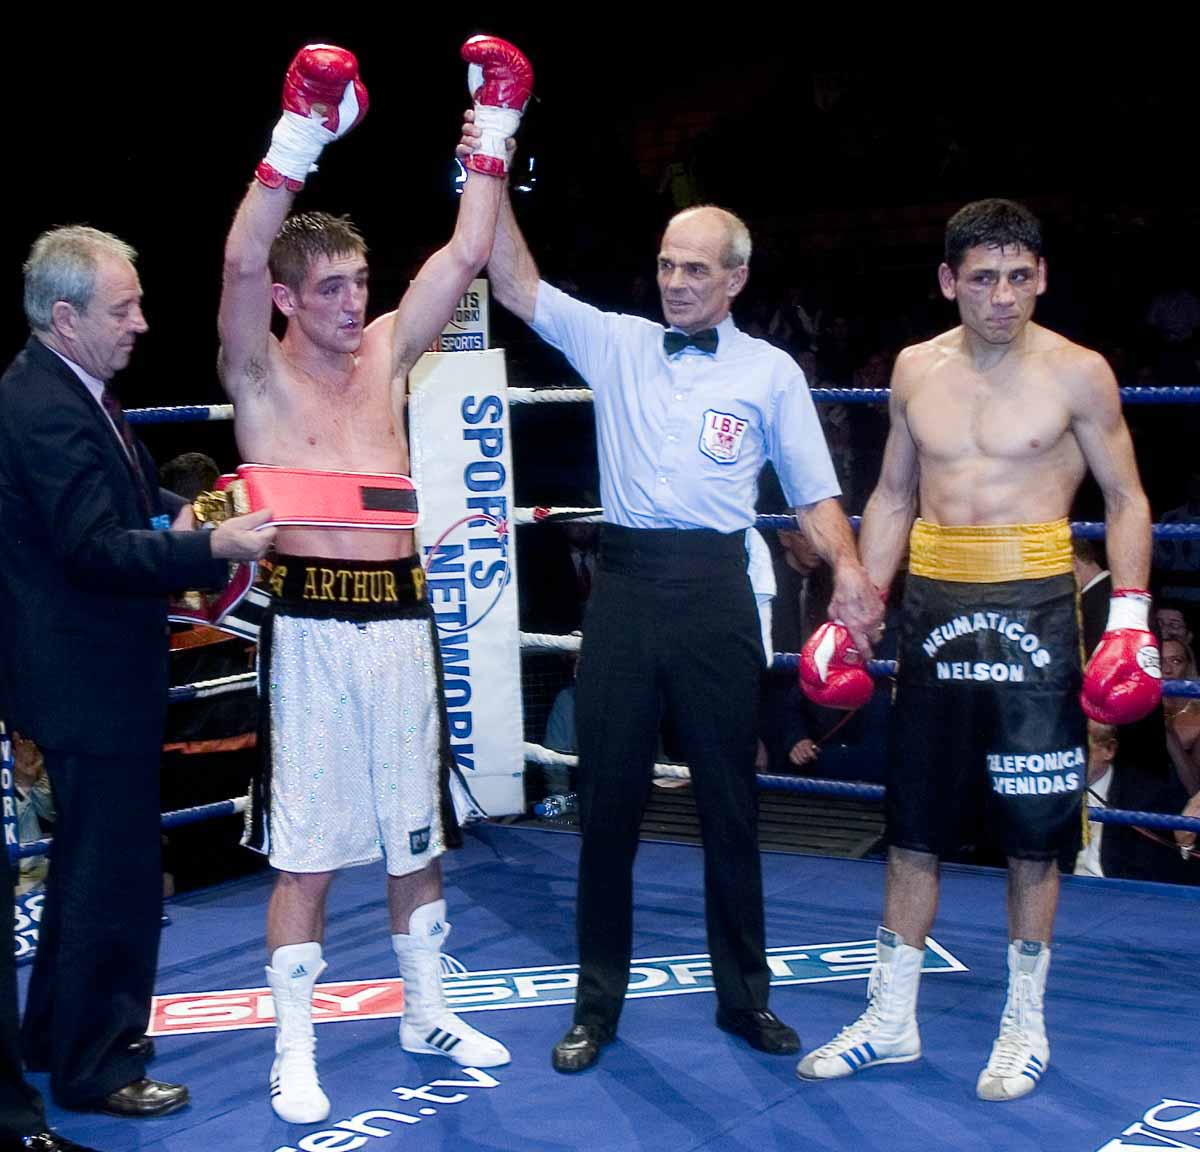 Arthur is pronounced winner after his IBF Intercontinental super-featherweight championship battle with Nazarenzo Gaston in 2004.